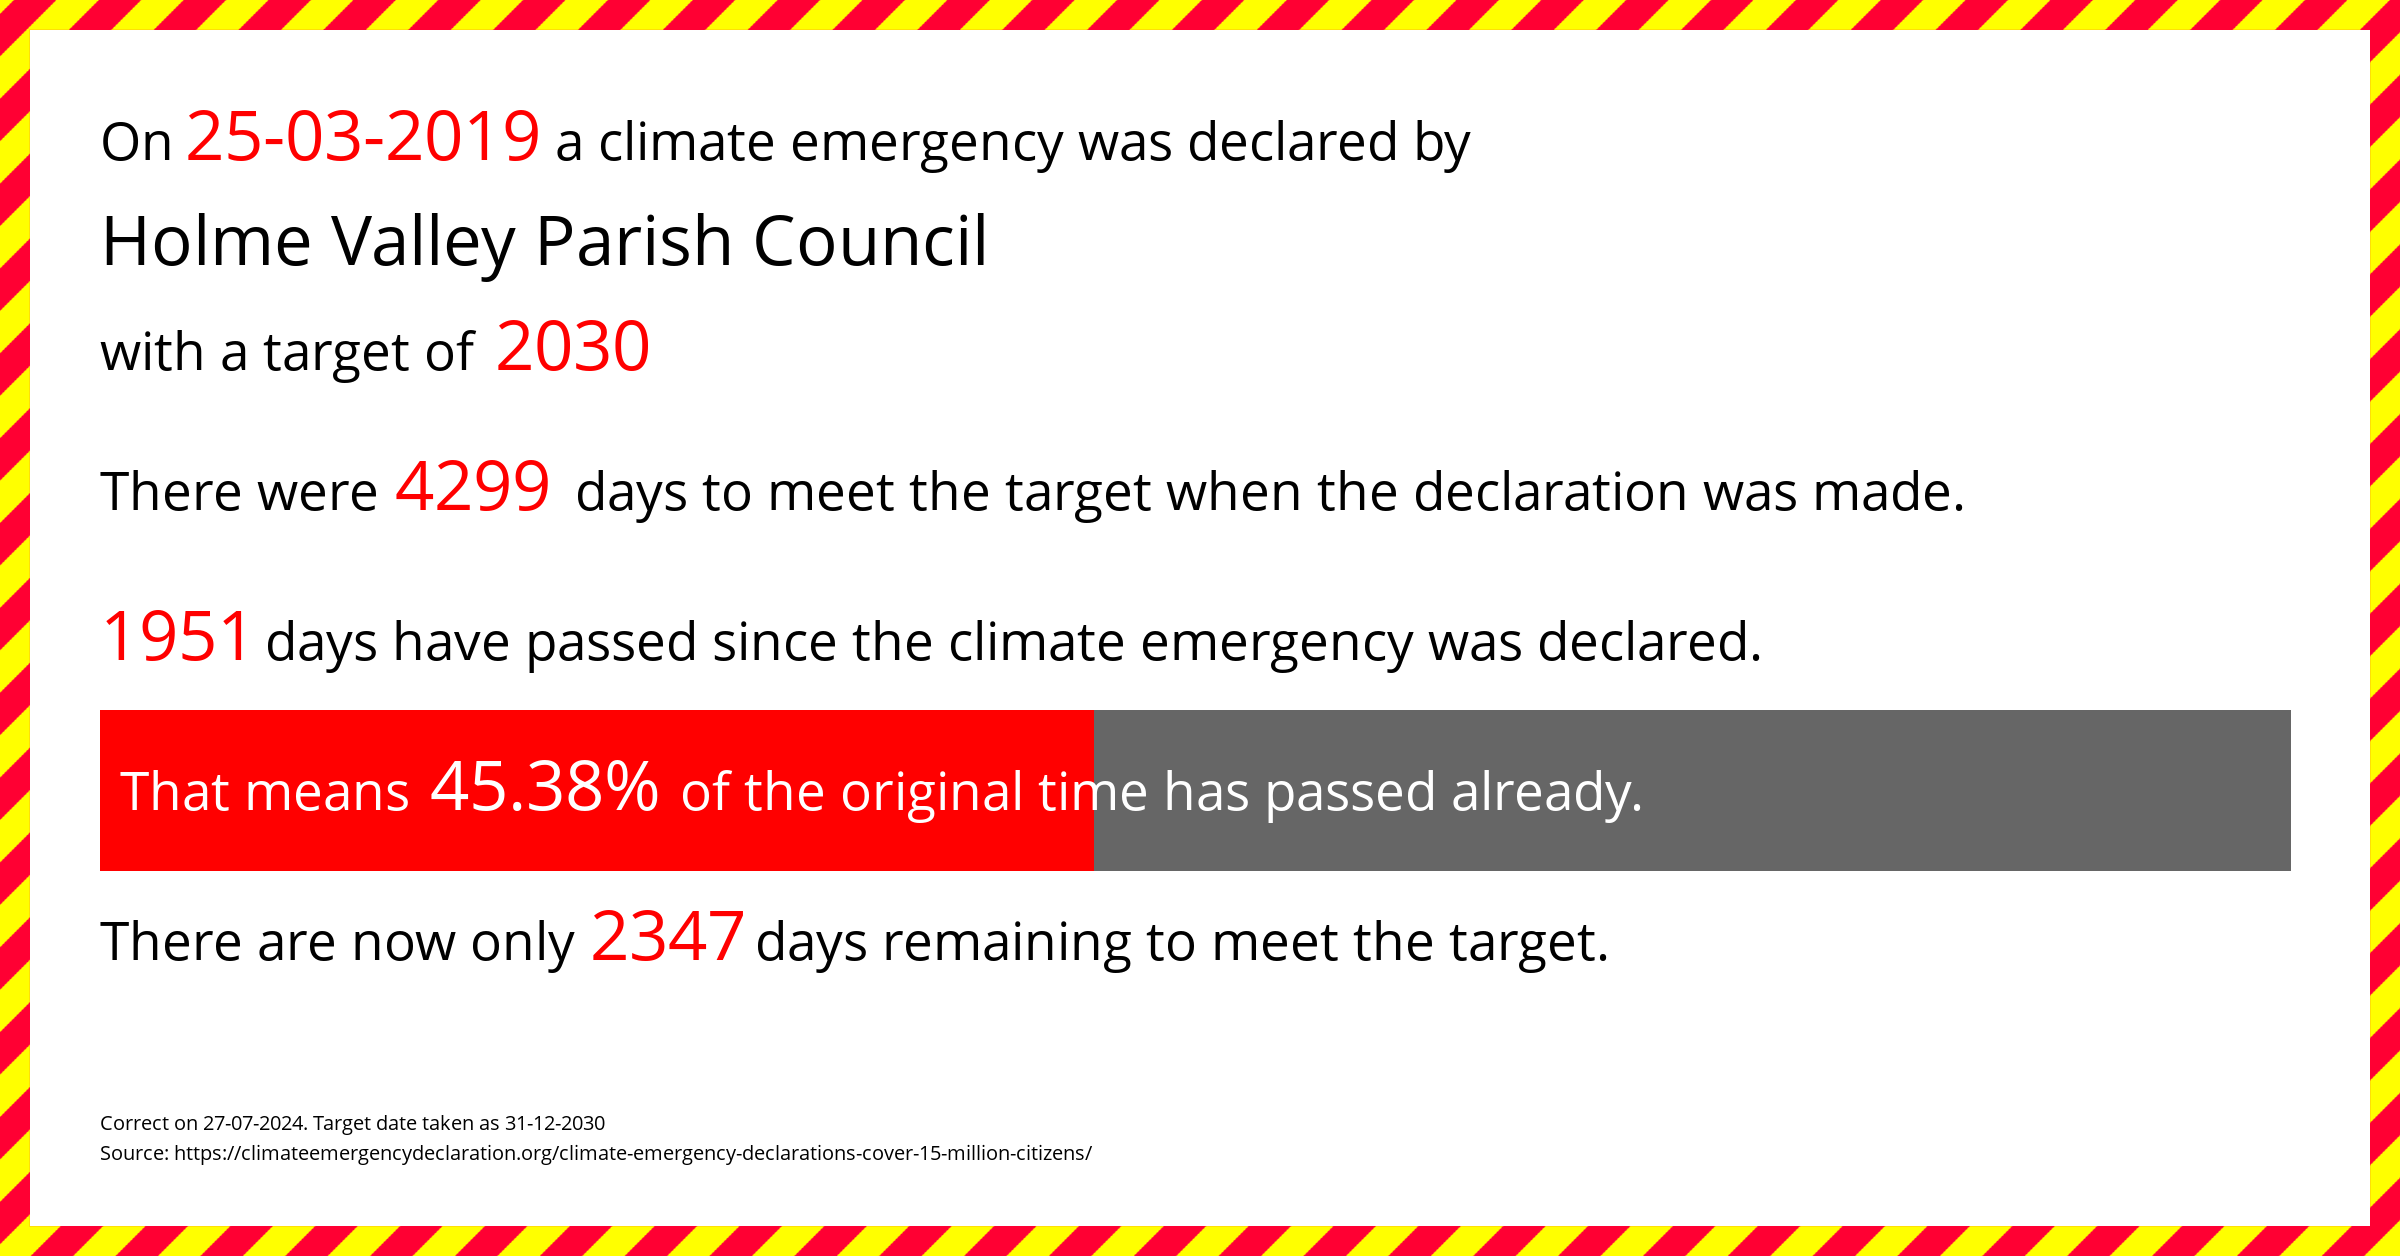 Holme Valley Parish Council declared a Climate emergency on Monday 25th March 2019, with a target of 2030.